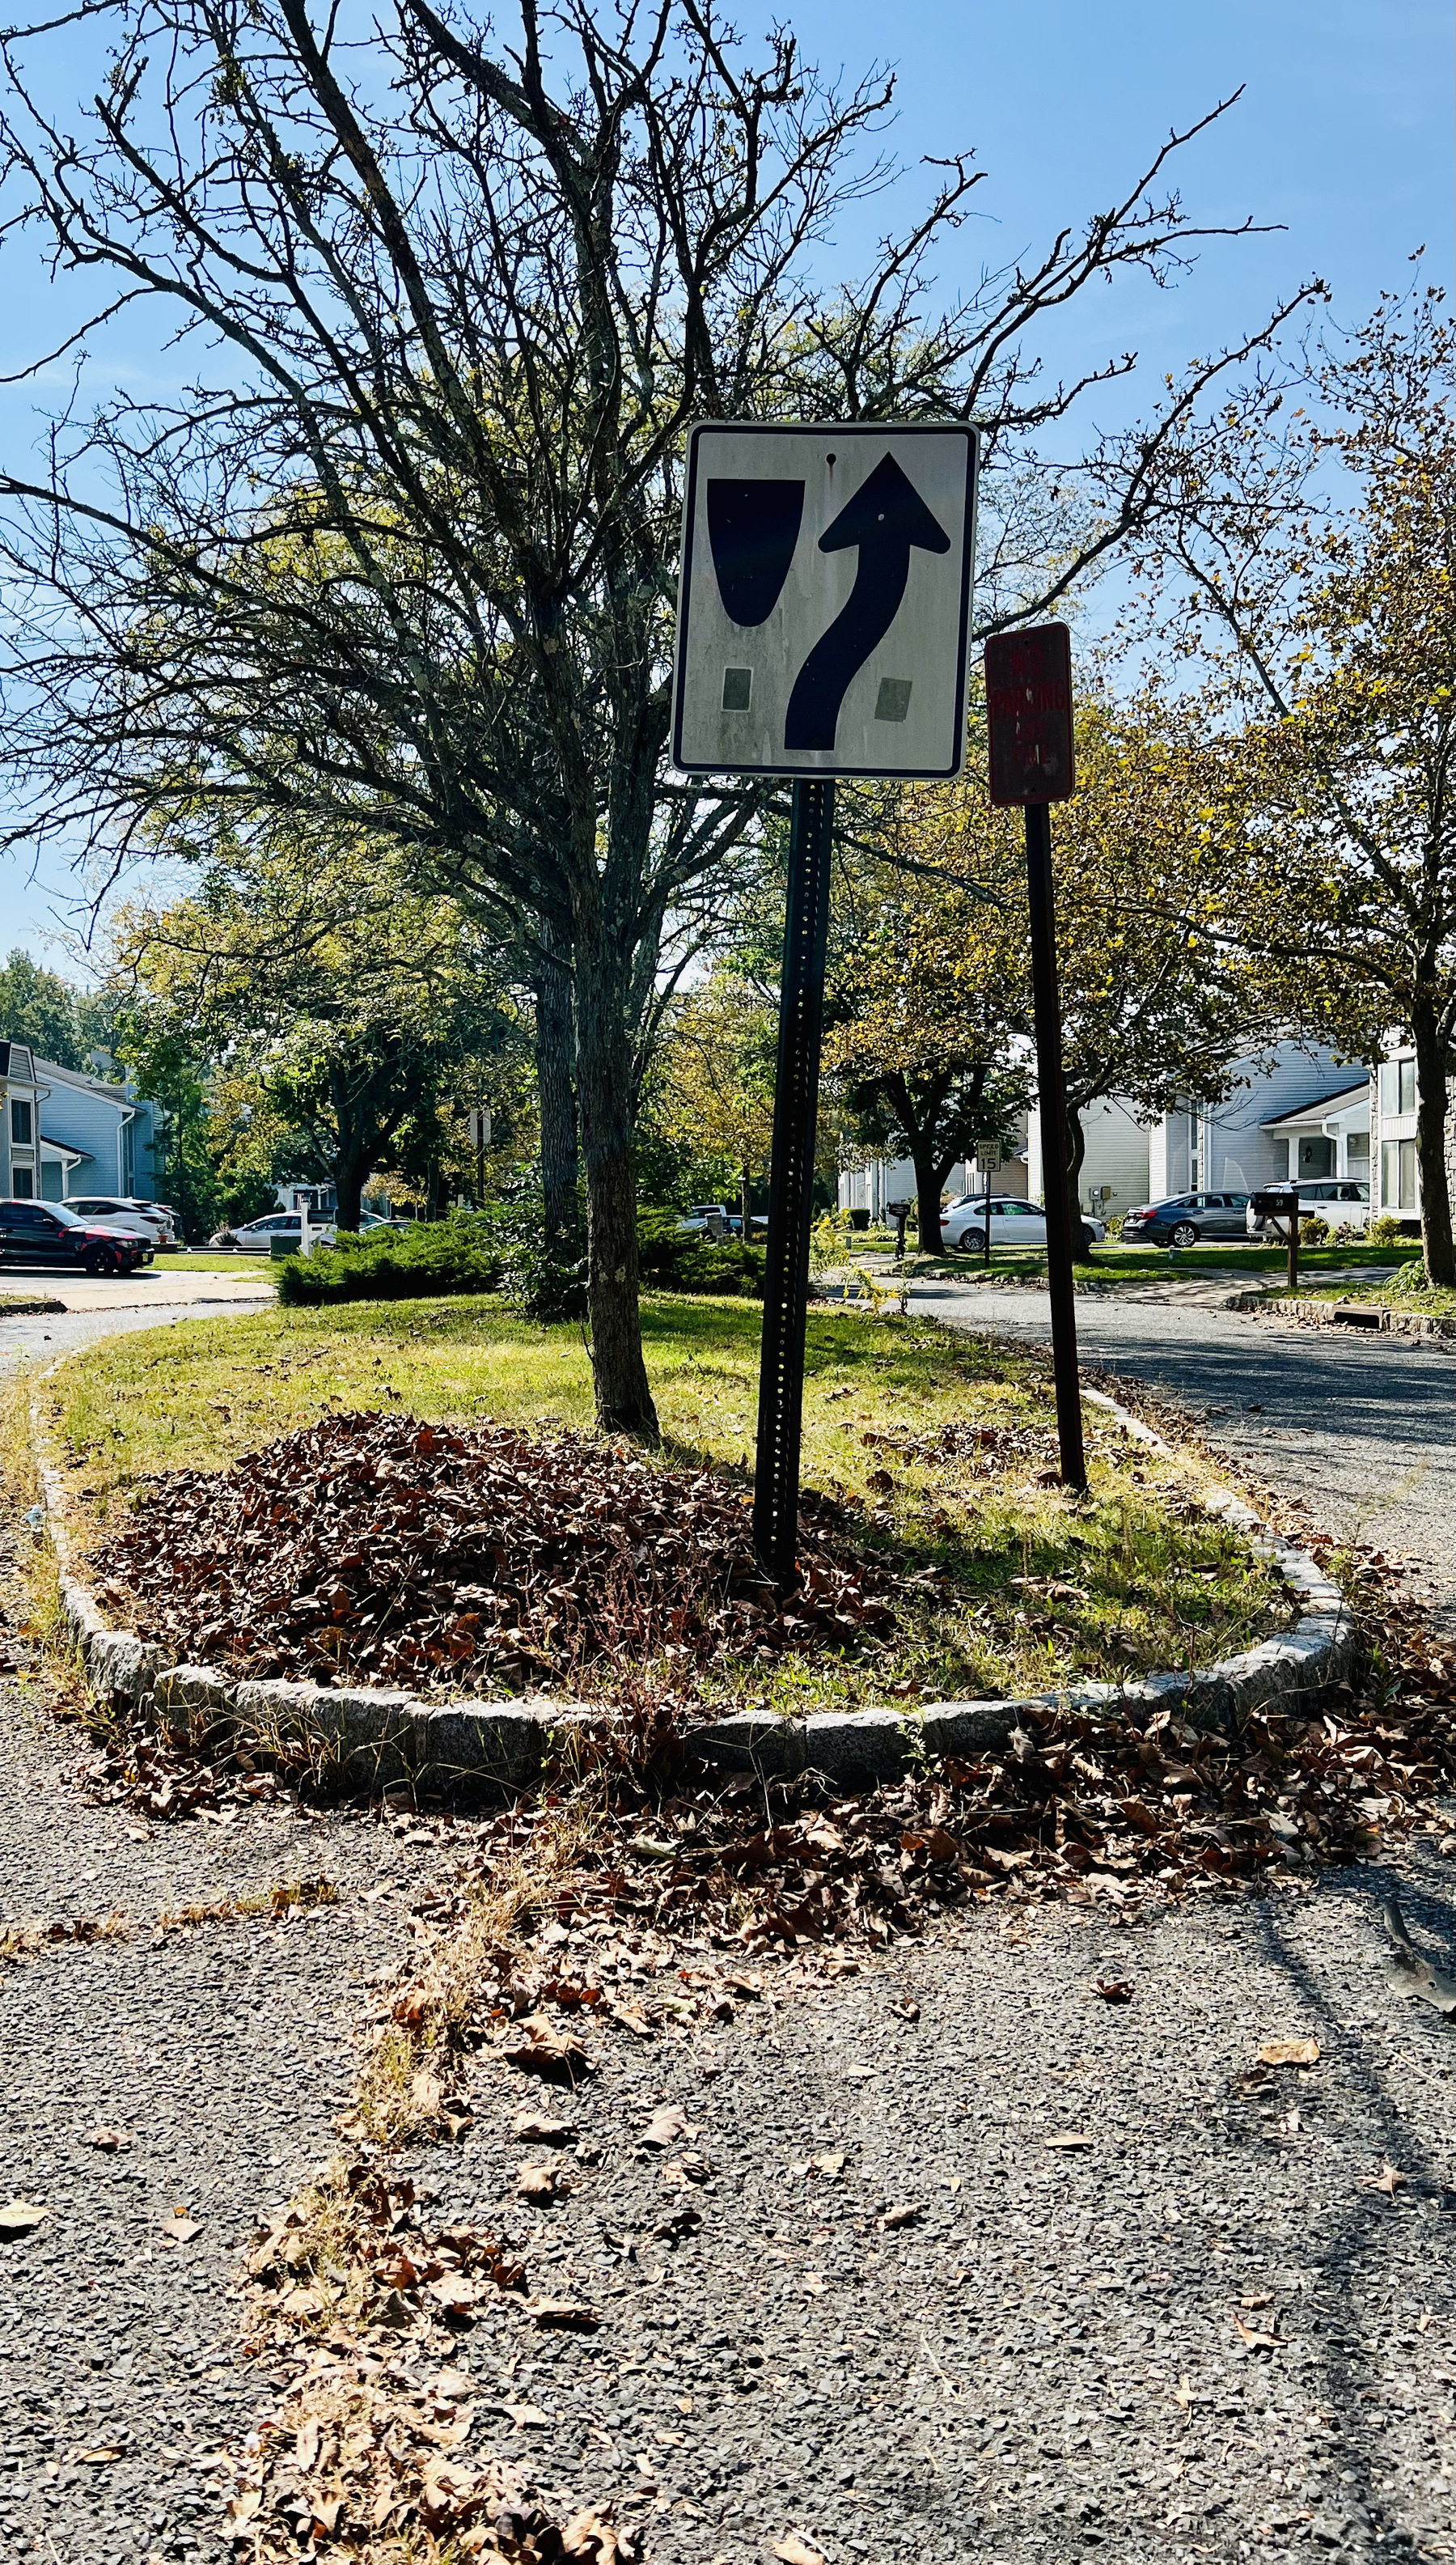 Tree in traffic median with pile of leaves at the bottom